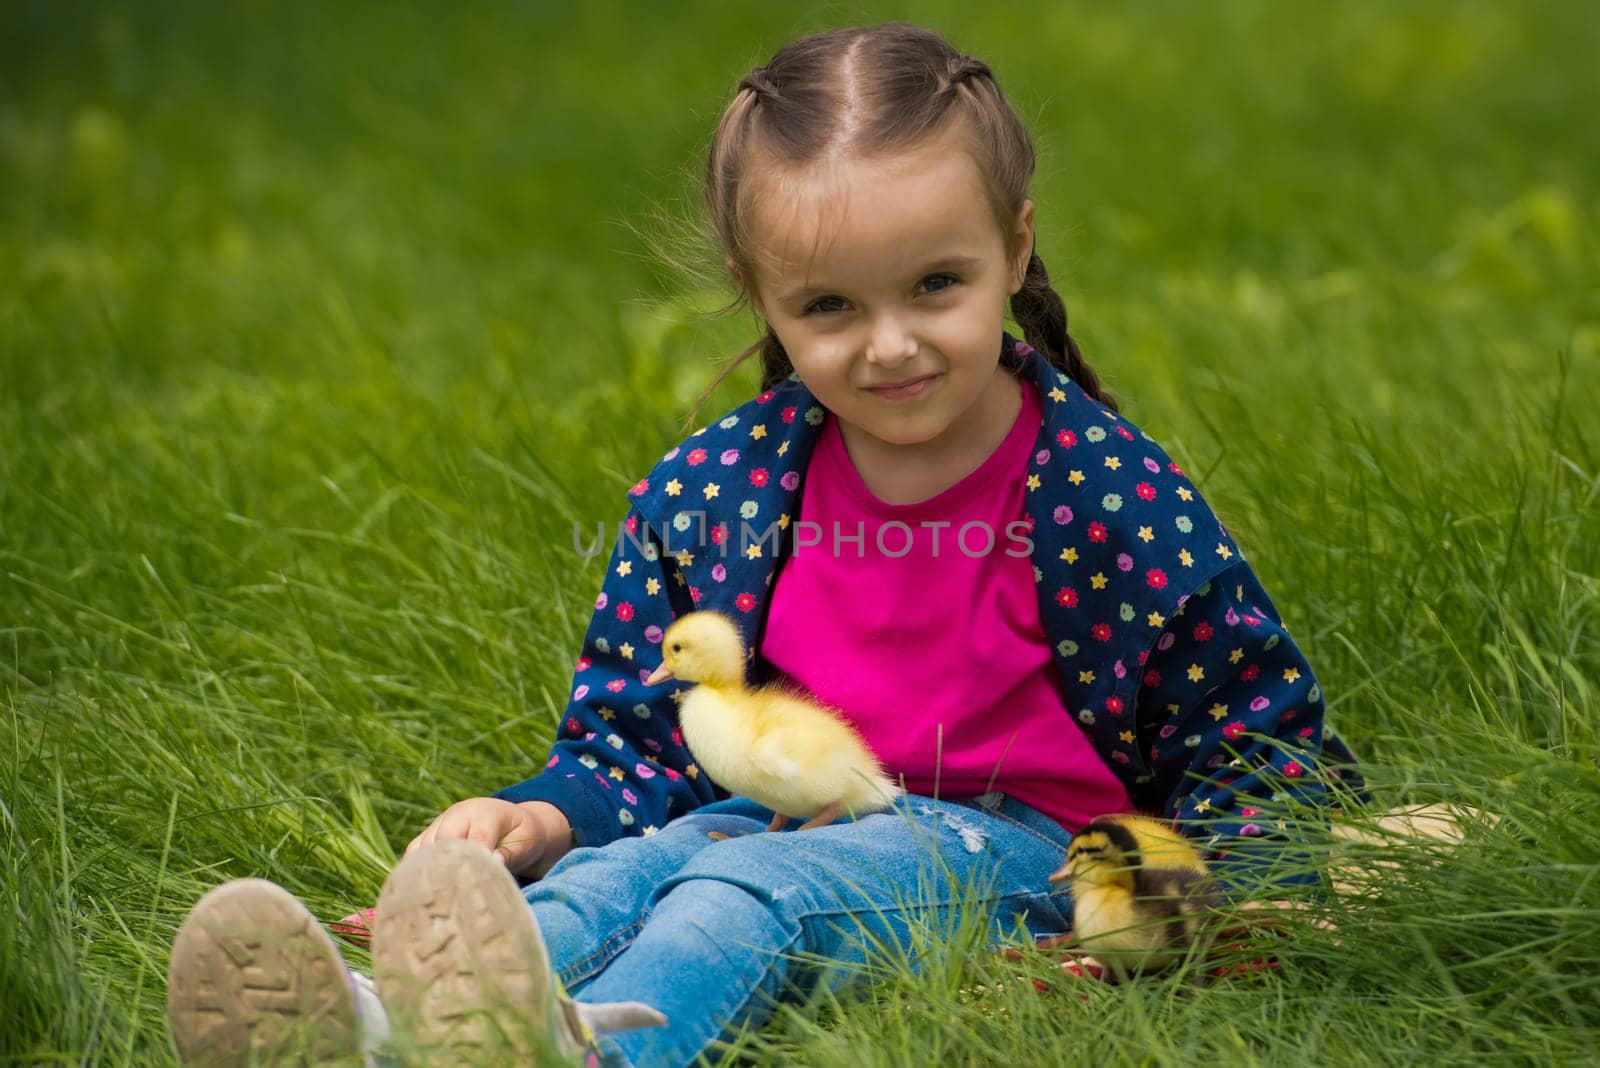 Cute happy little girl with of small ducklings in the garden. Nature background.